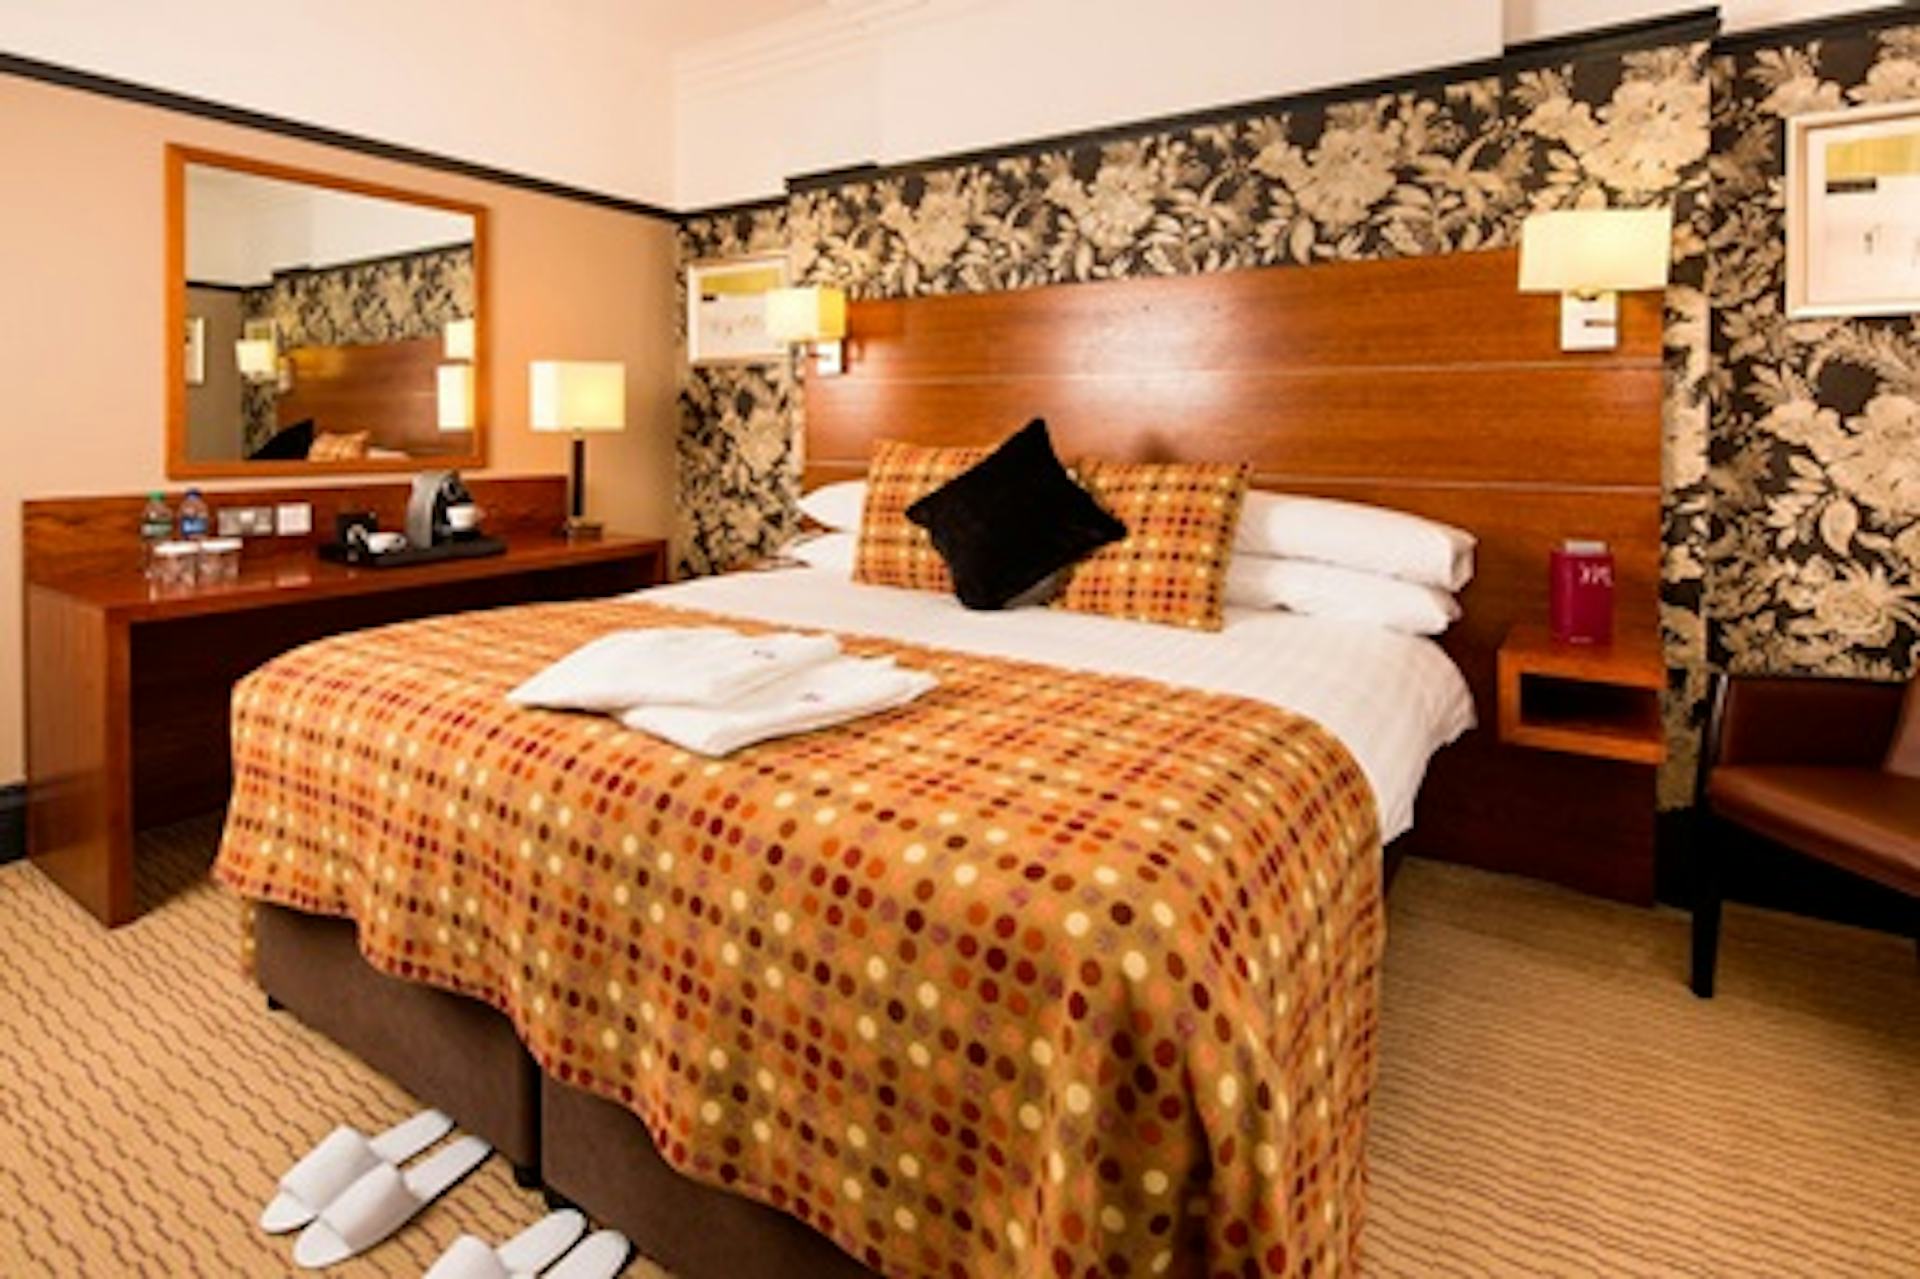 One Night Break for Two at the Mercure Livingston Hotel